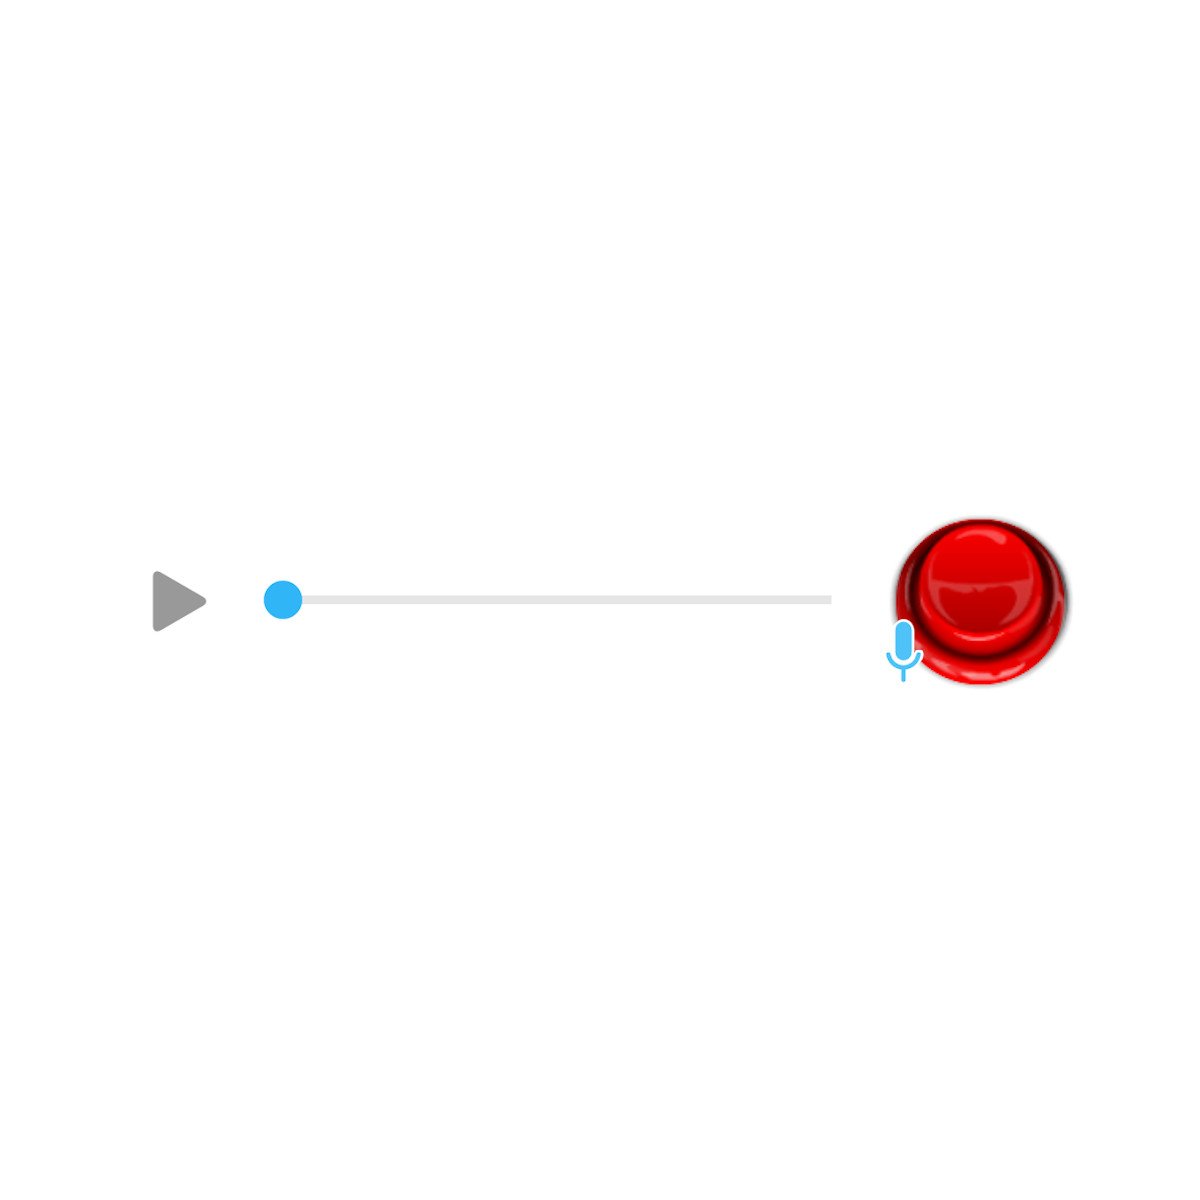 Among Us role reveal sound - Instant Sound Effect Button